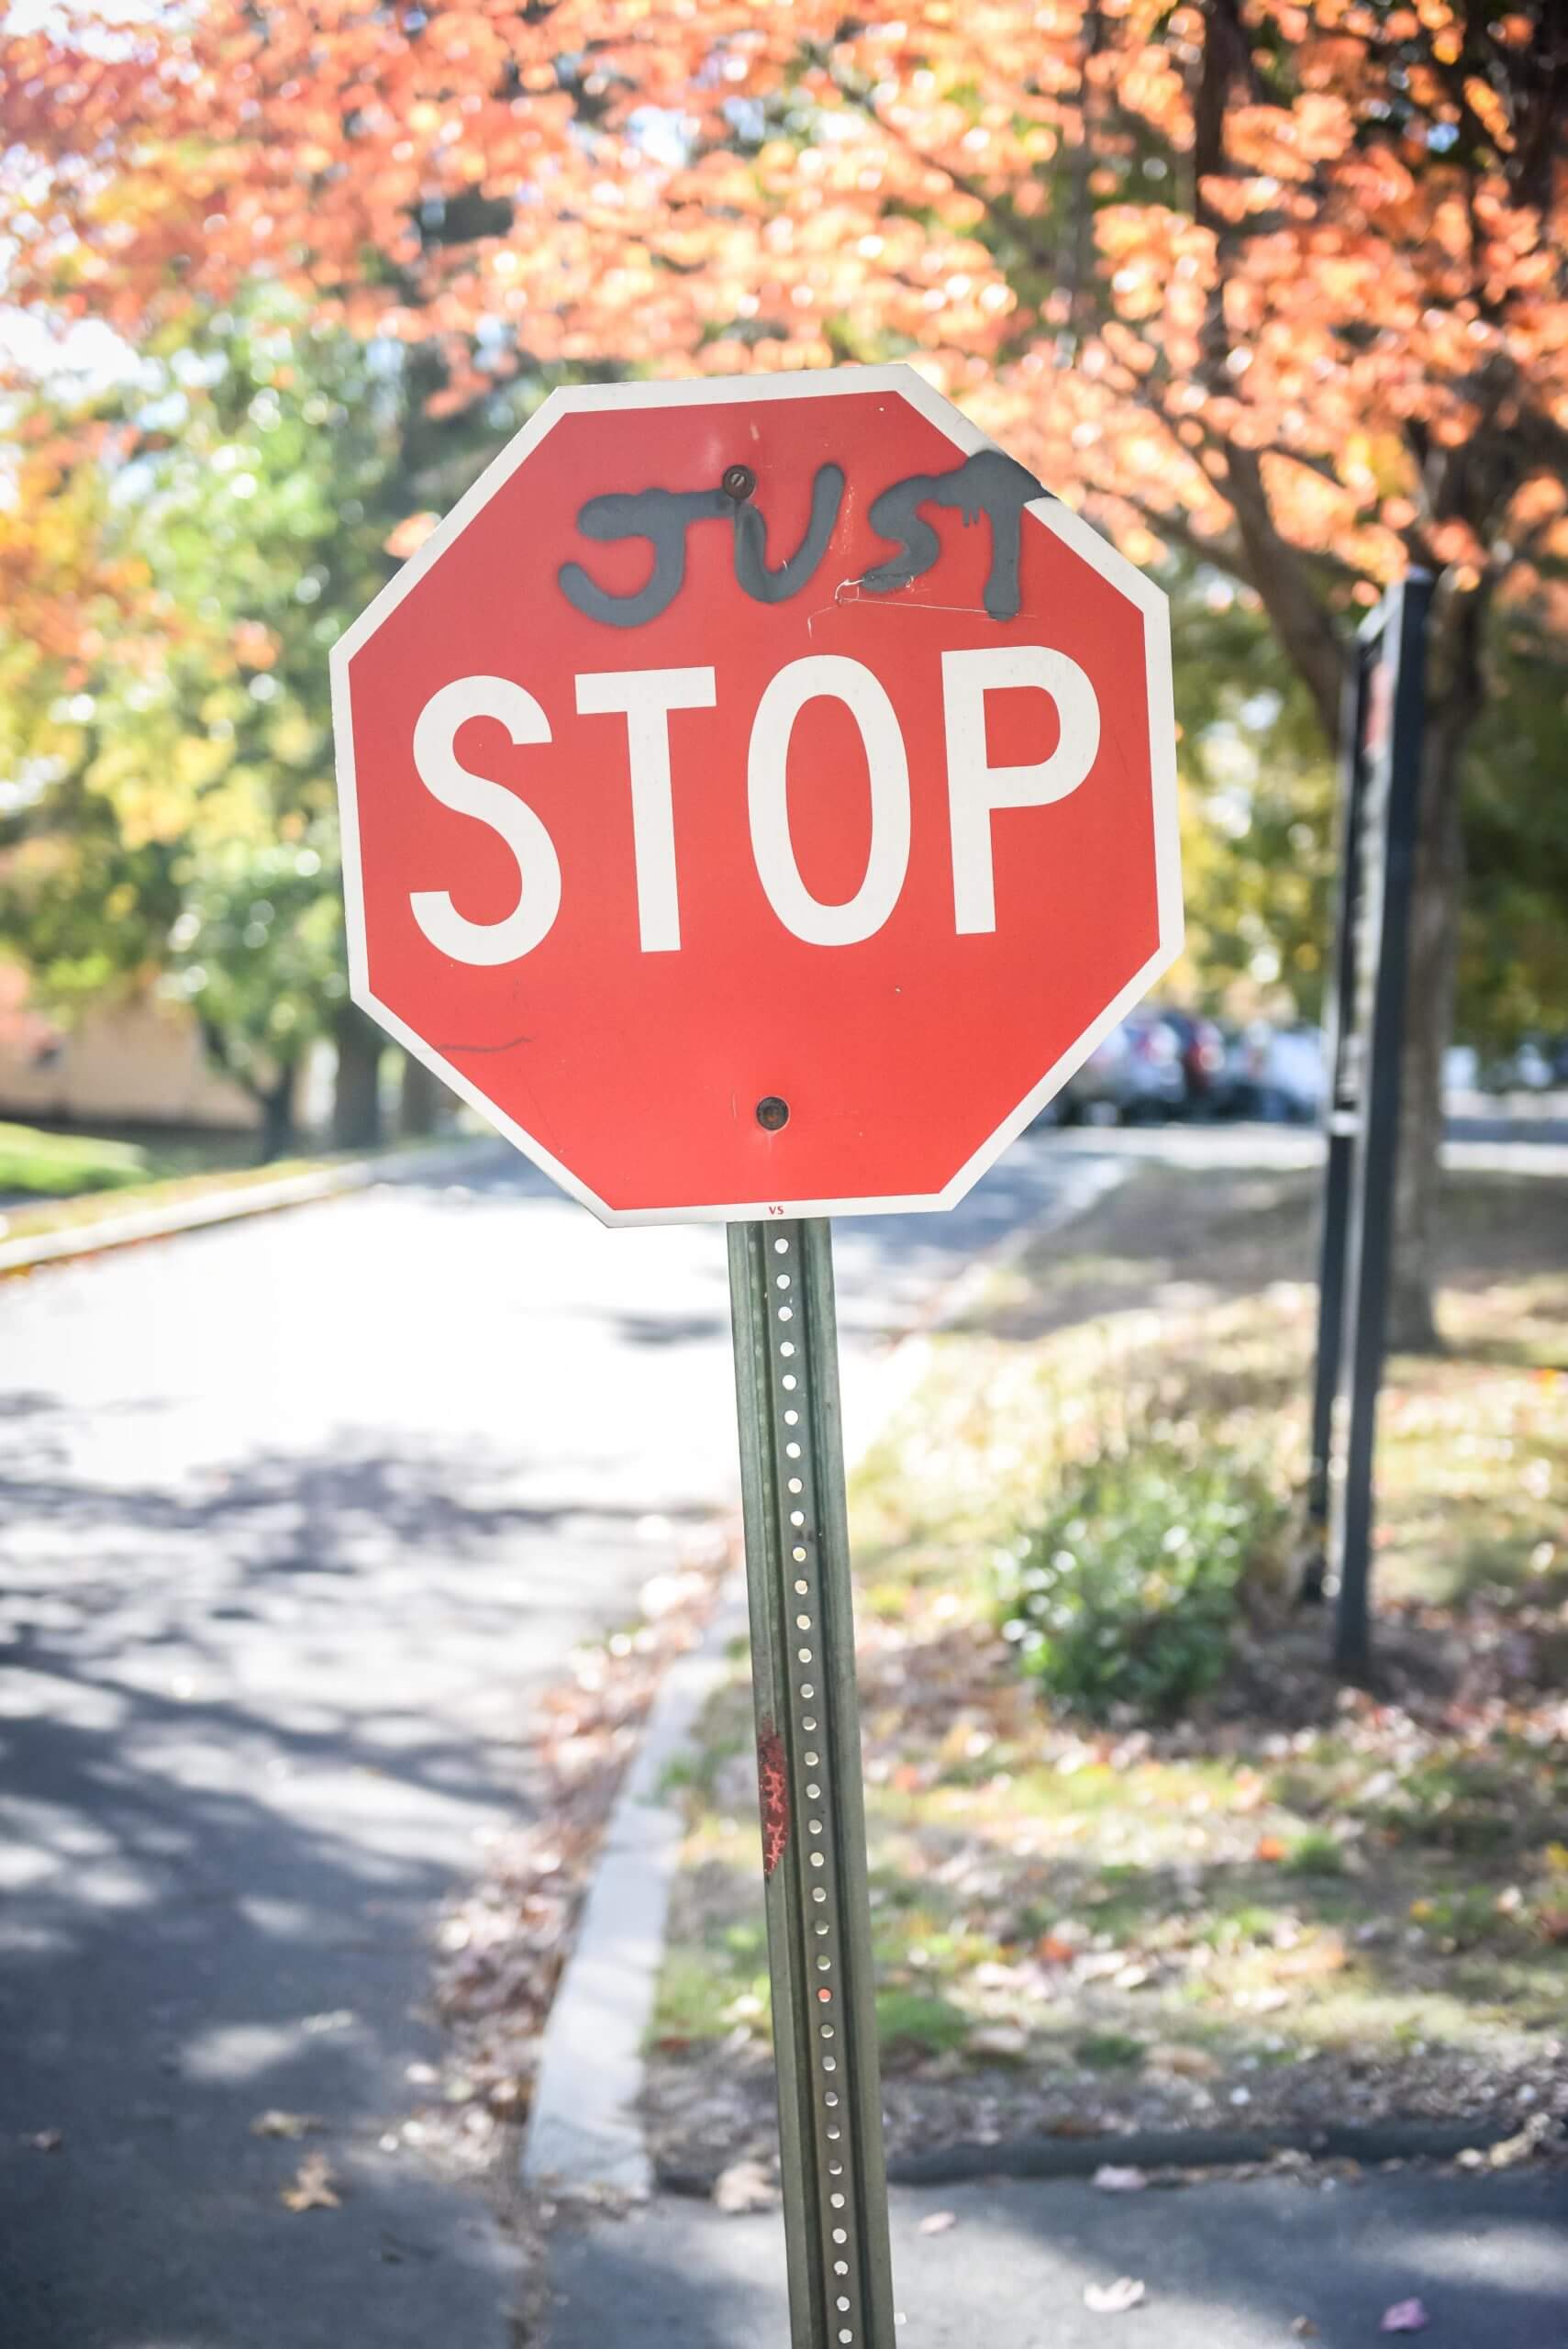 A stop sign reads "just stop." The word "just" is written in spray painted letters above "stop."